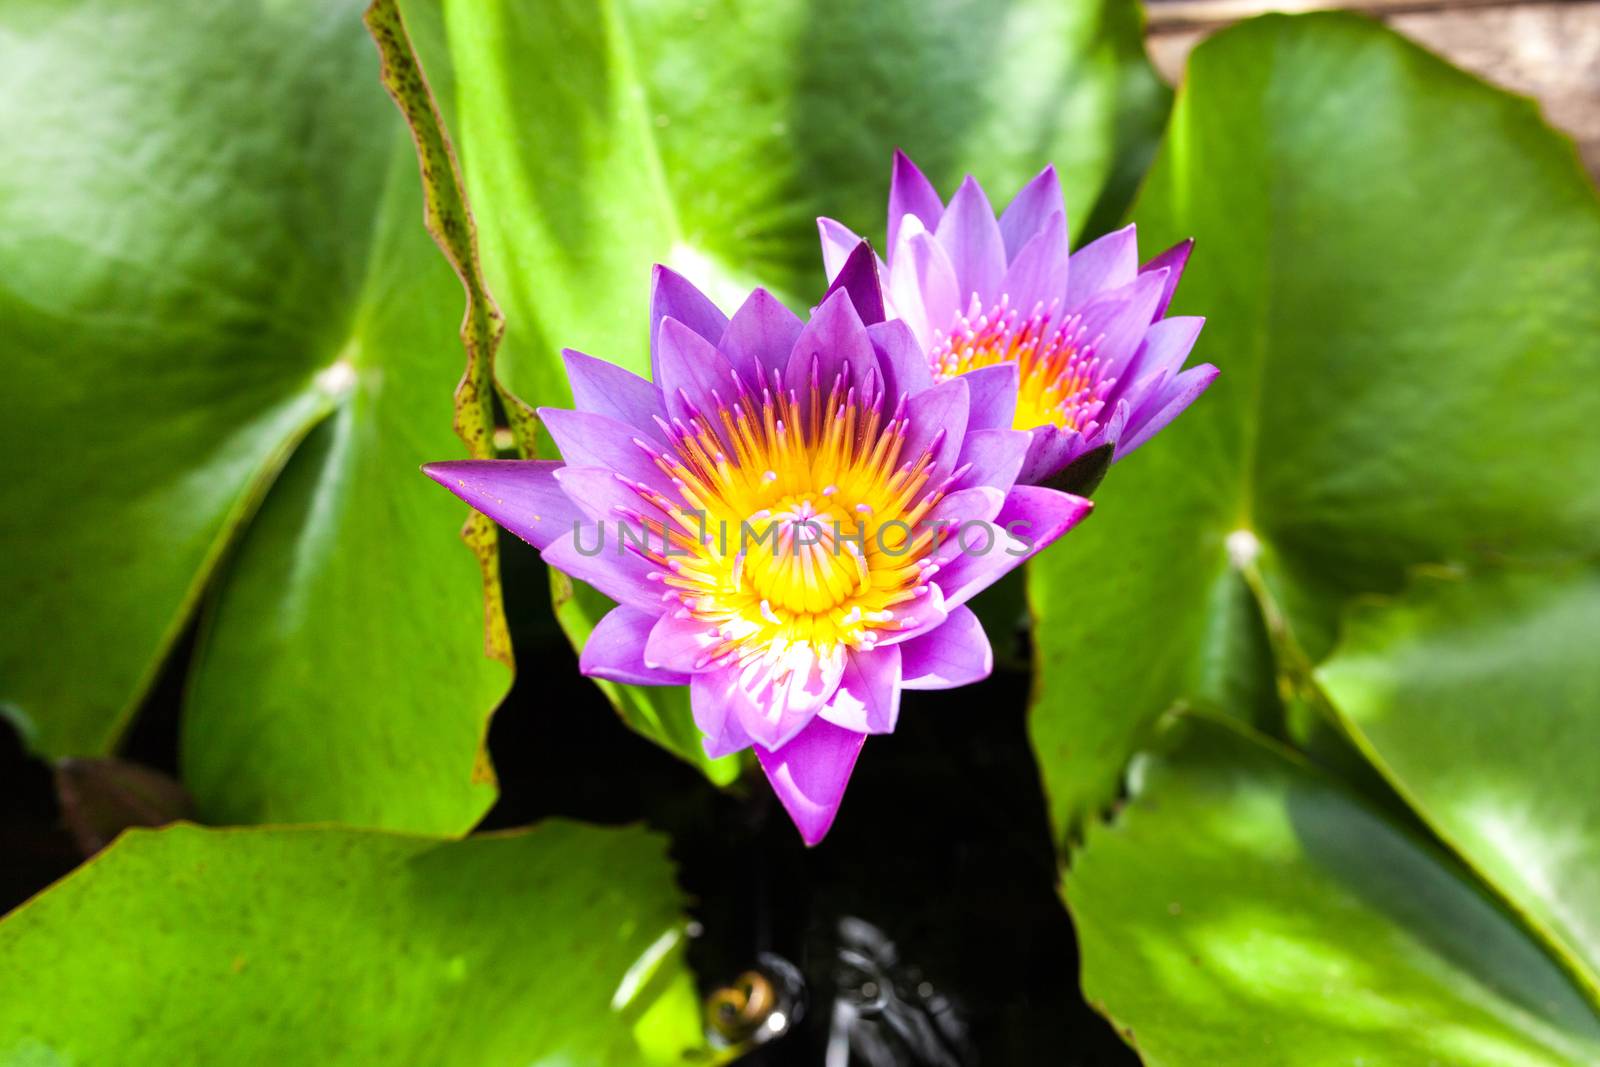 Beautiful lotus flower. Saturated colors and vibrant detail make this an almost surreal image.